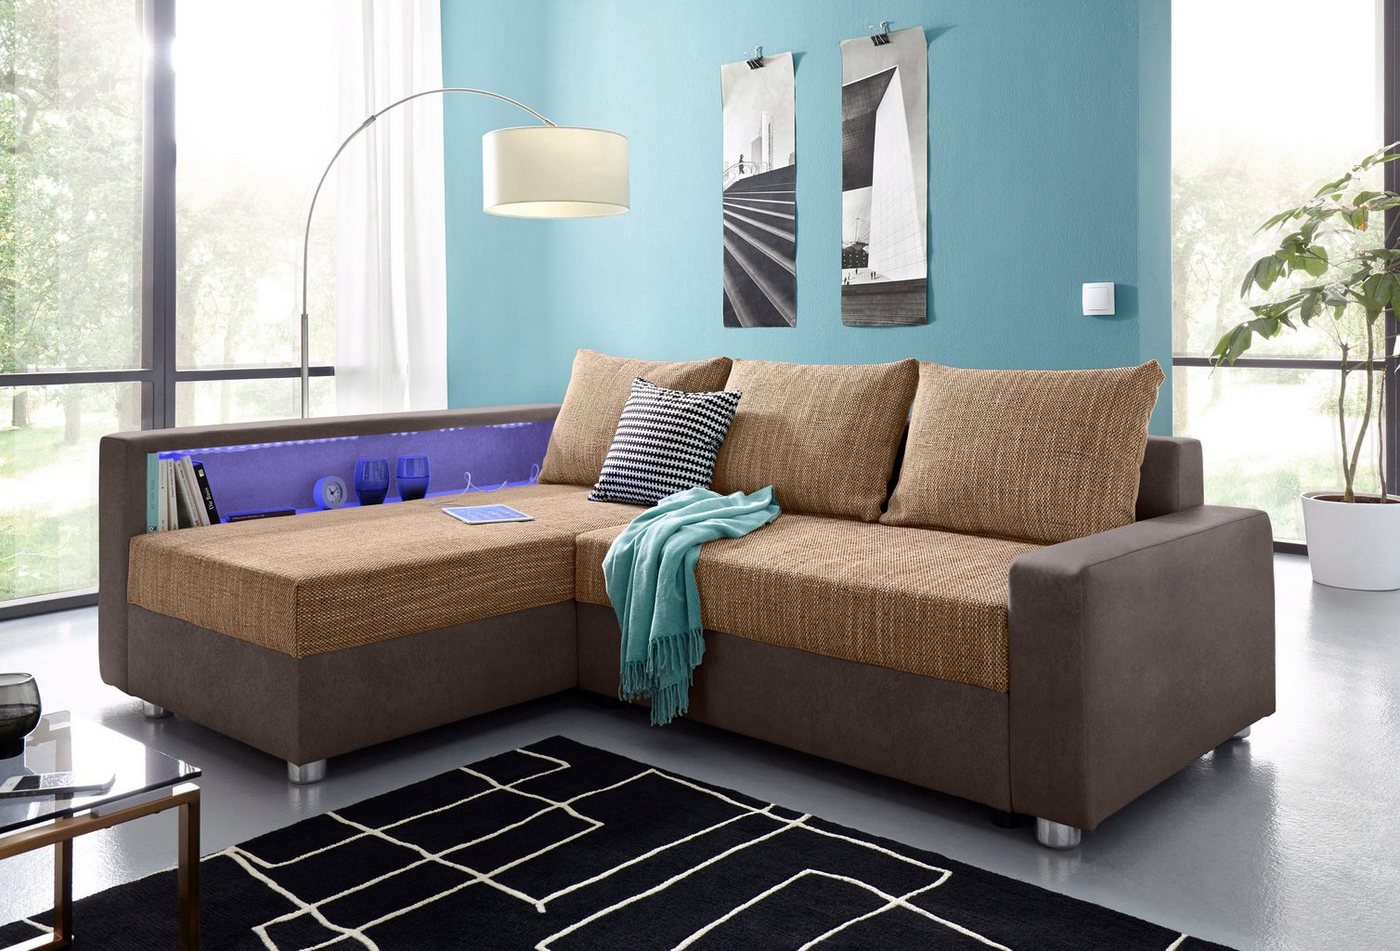 COLLECTION AB Ecksofa Relax L-Form, inklusive Bettfunktion, Federkern, wahlweise mit RGB-LED-Beleuchtung von COLLECTION AB